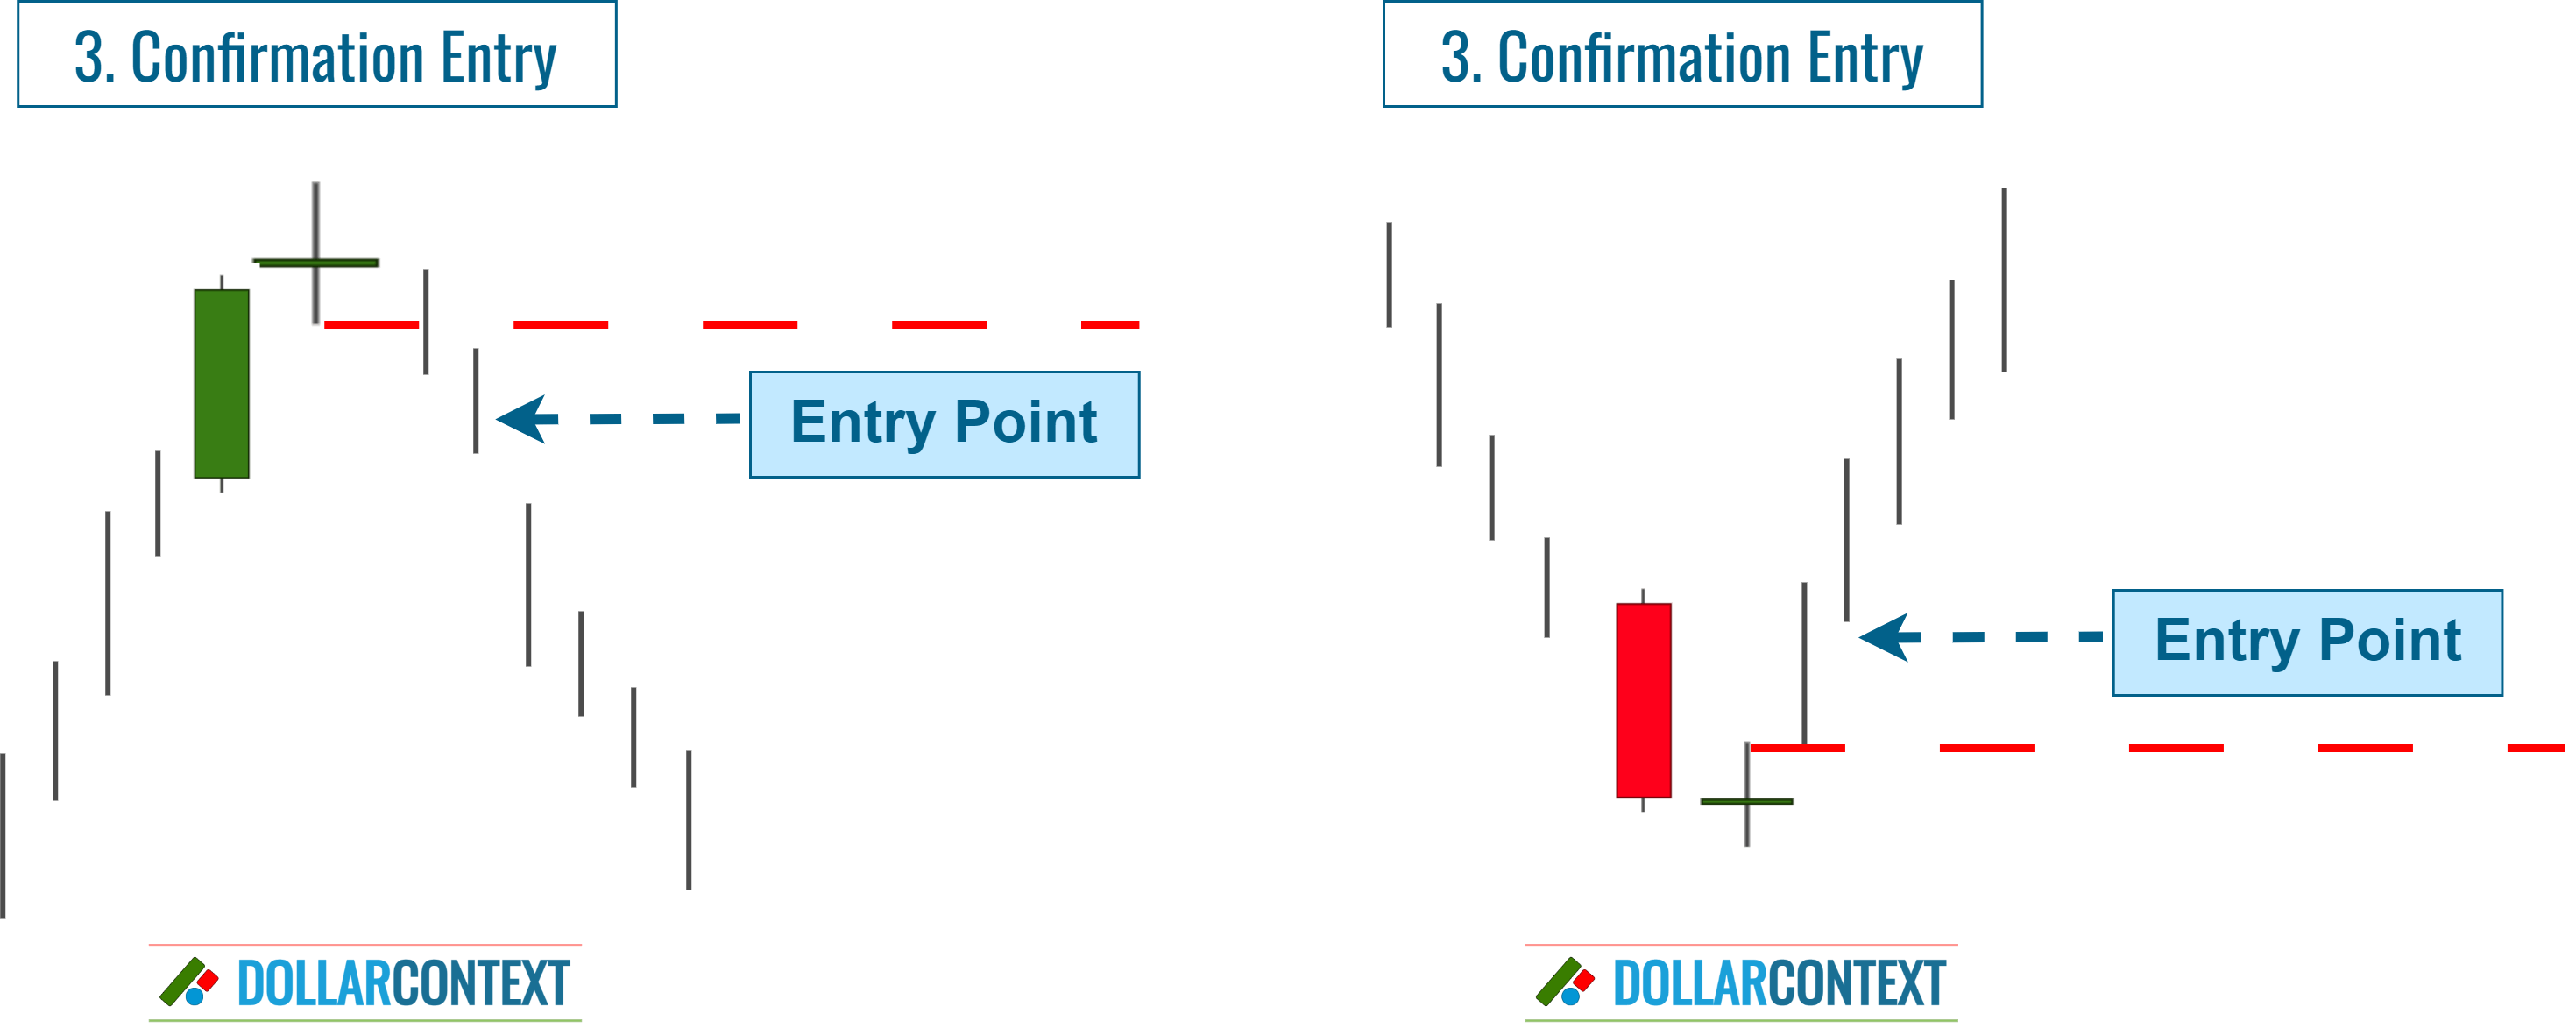 Confirmation Entry After a Doji